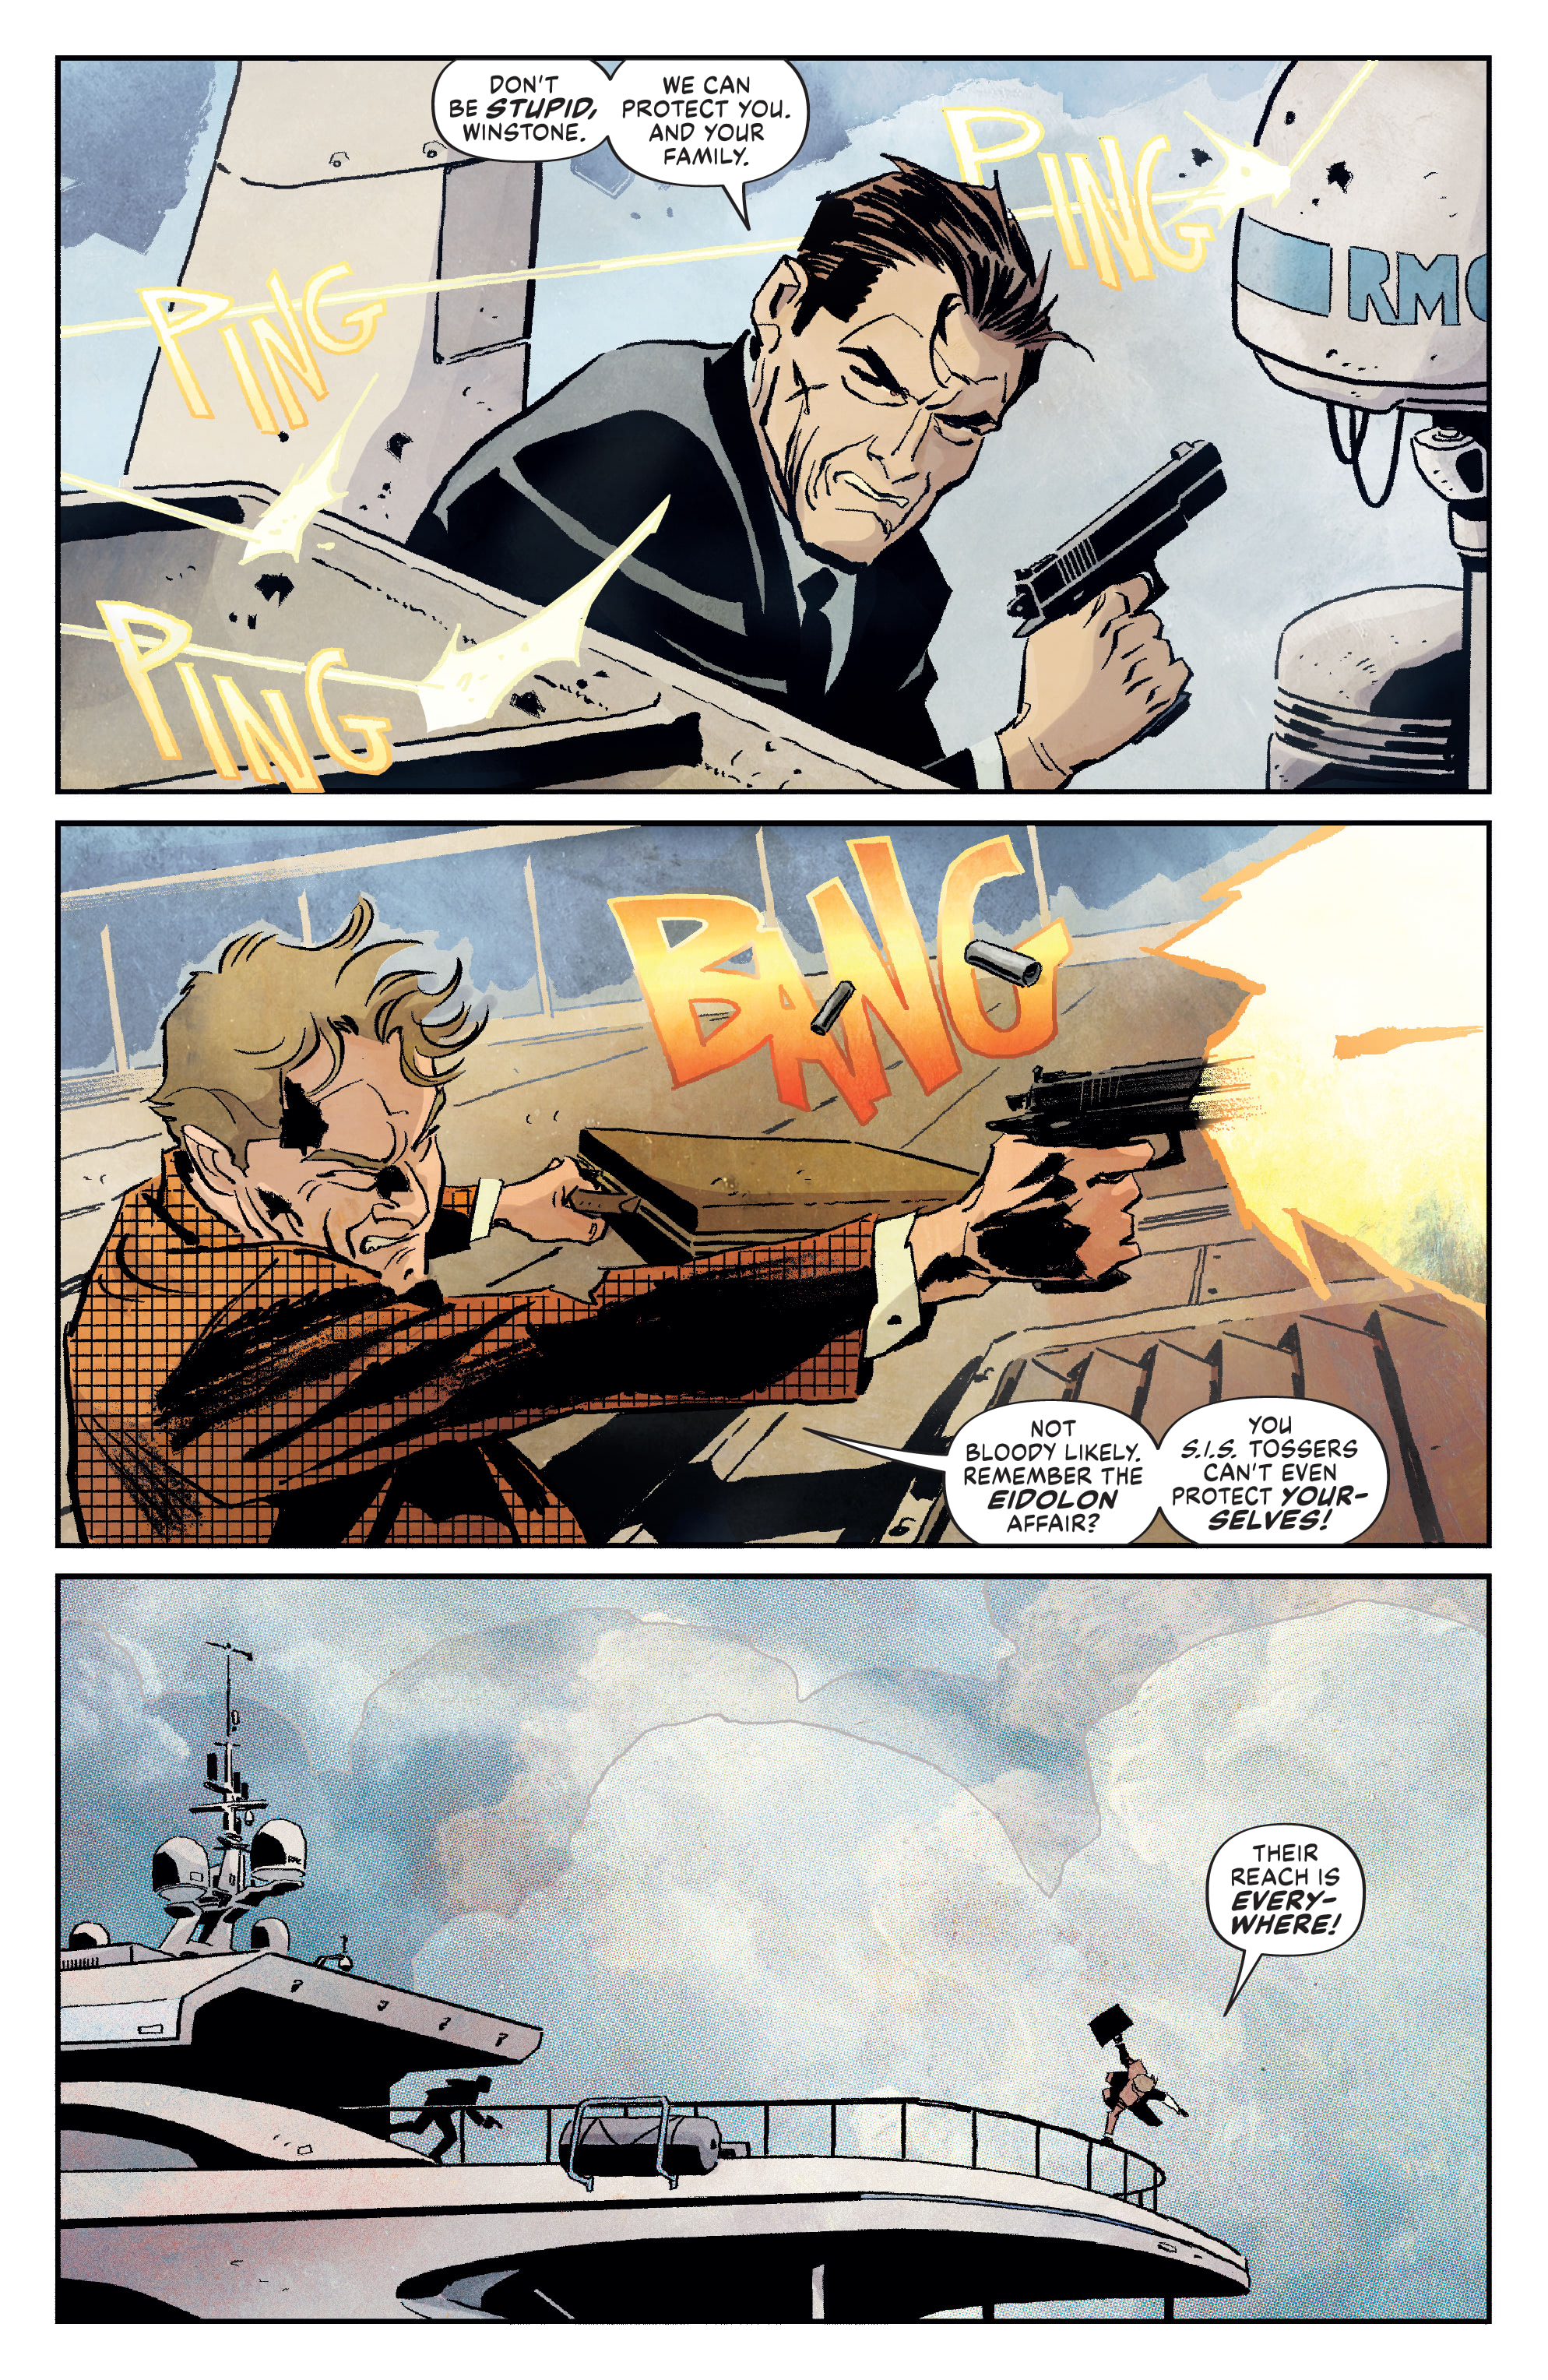 James Bond: Agent of Spectre (2021-): Chapter 1 - Page 3